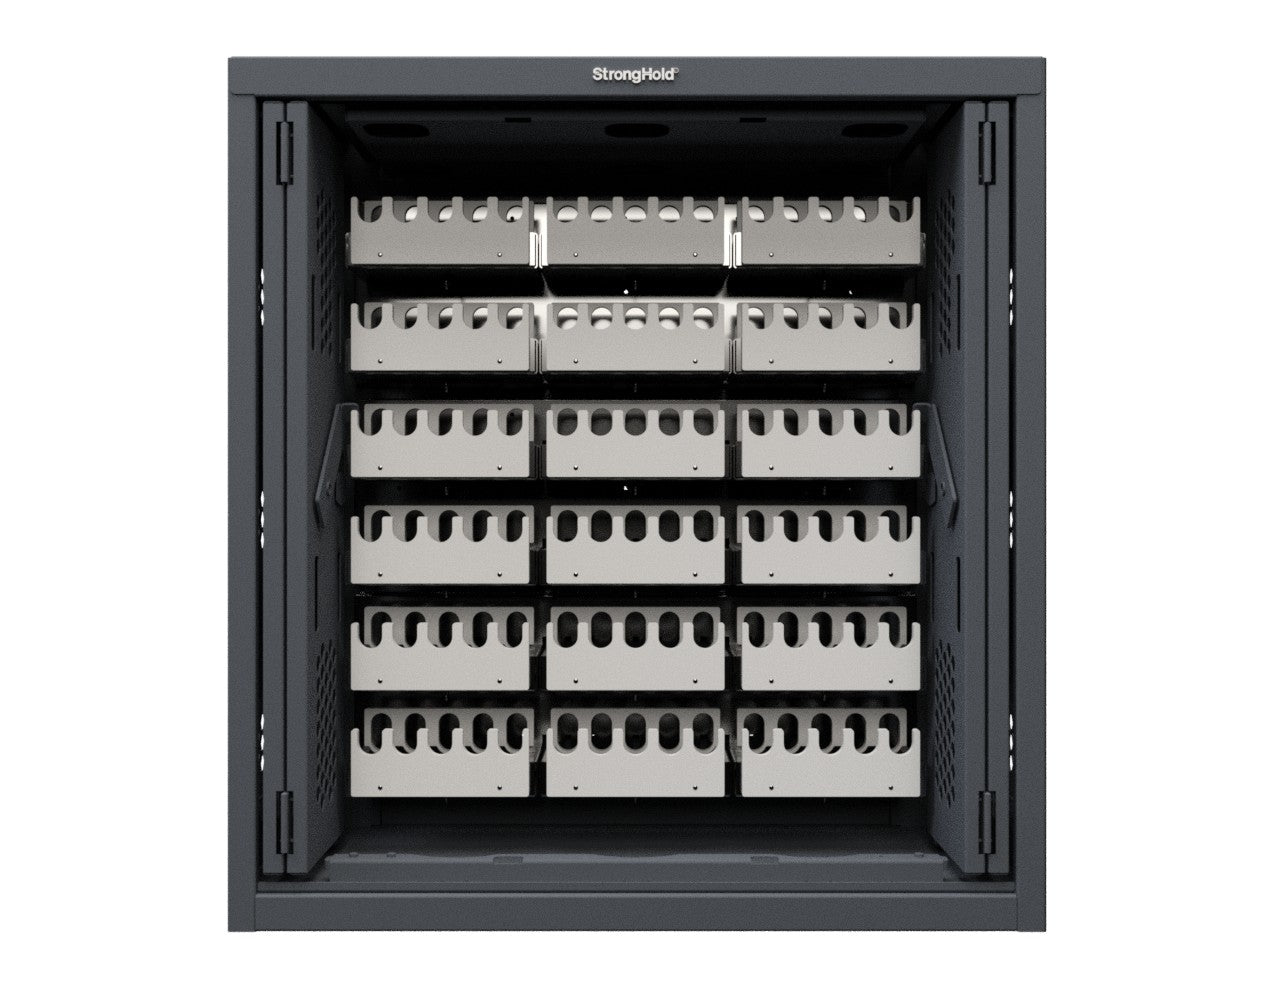 Modular Weapons Storage M17 Cabinet with Recessed Doors - 42 in. W x 16 1/2 in. D x 45 in. H